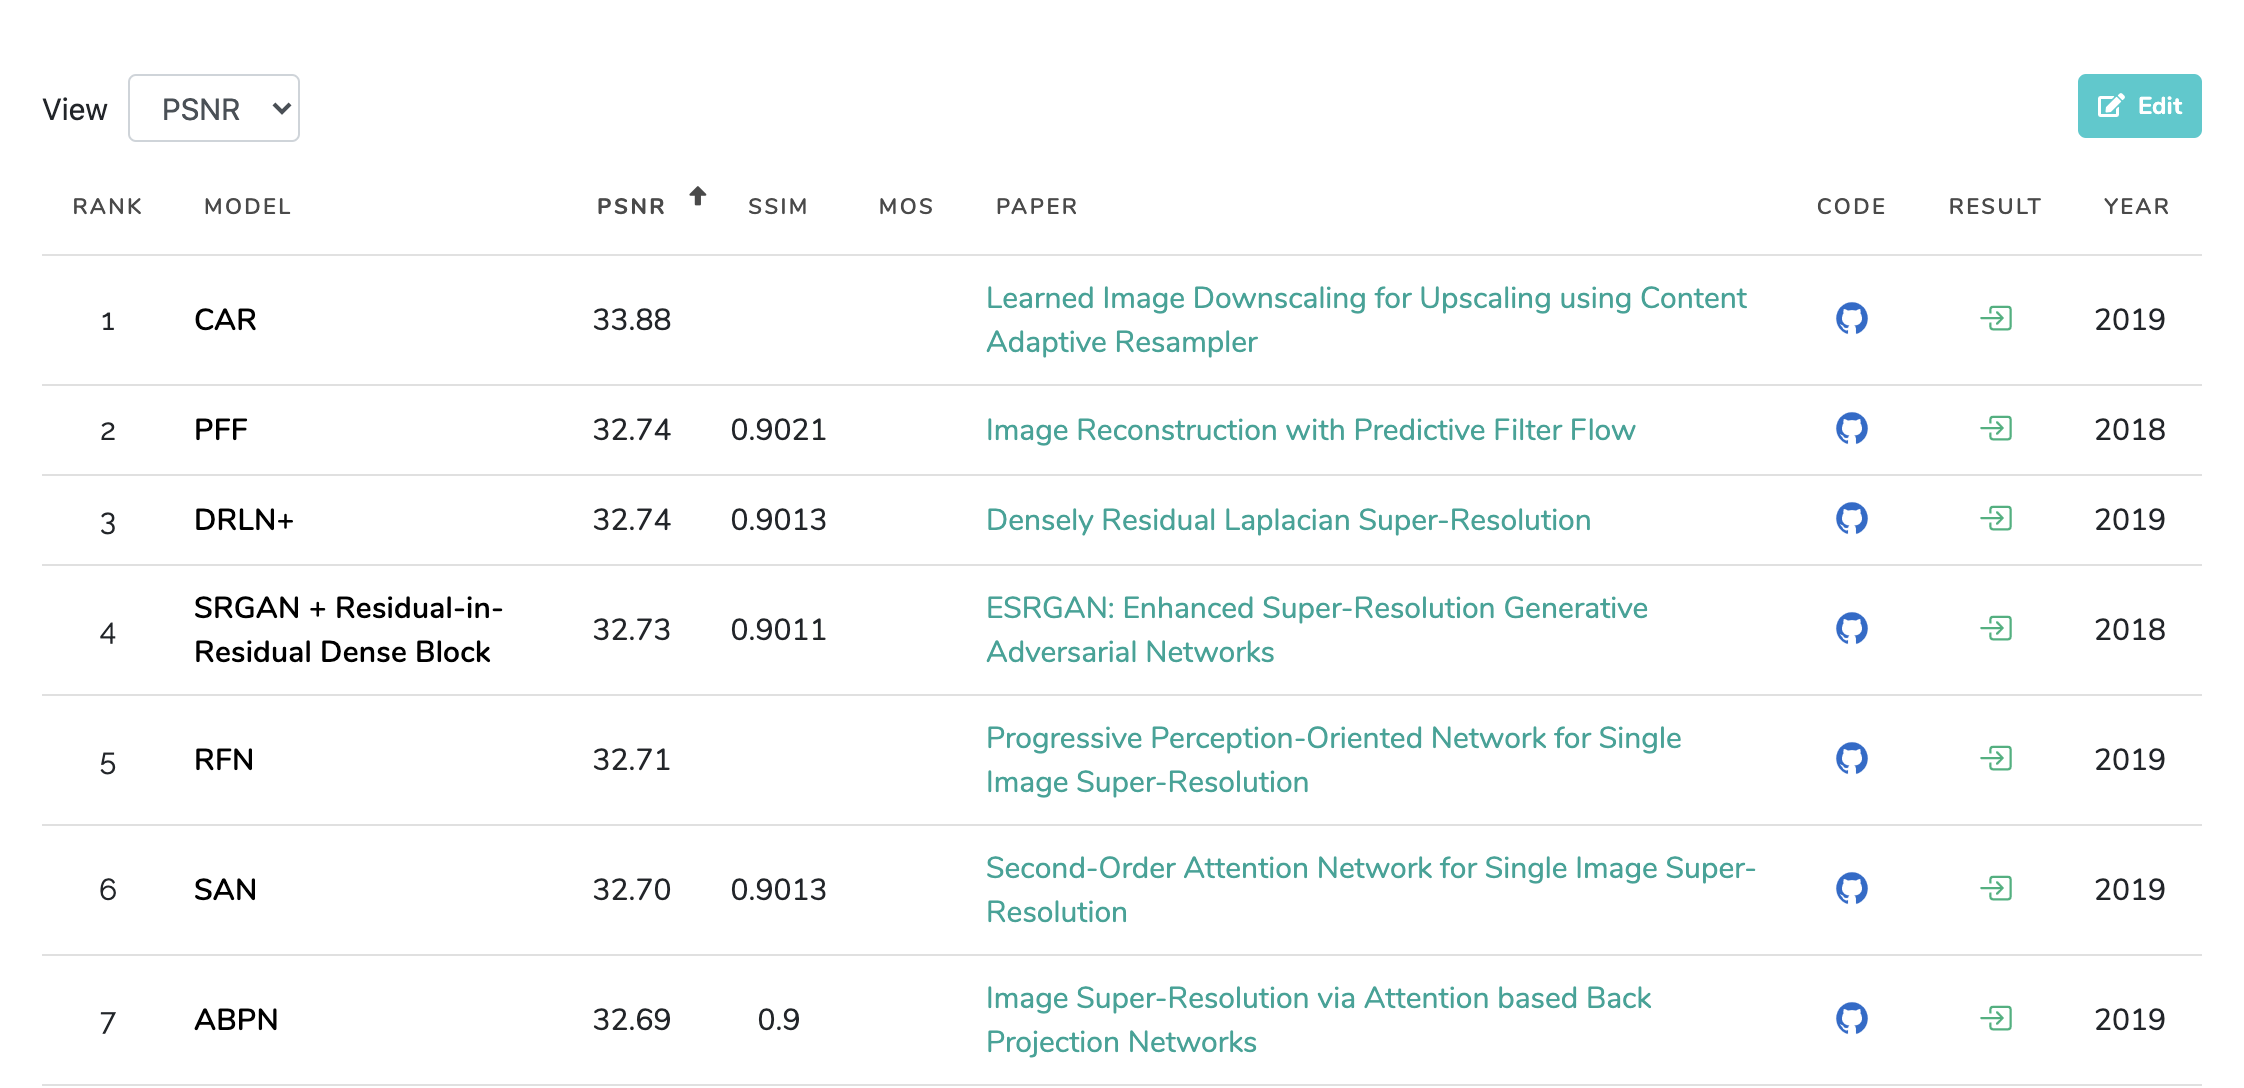 Top Ranked Methods for Super Resolution as of August 2020